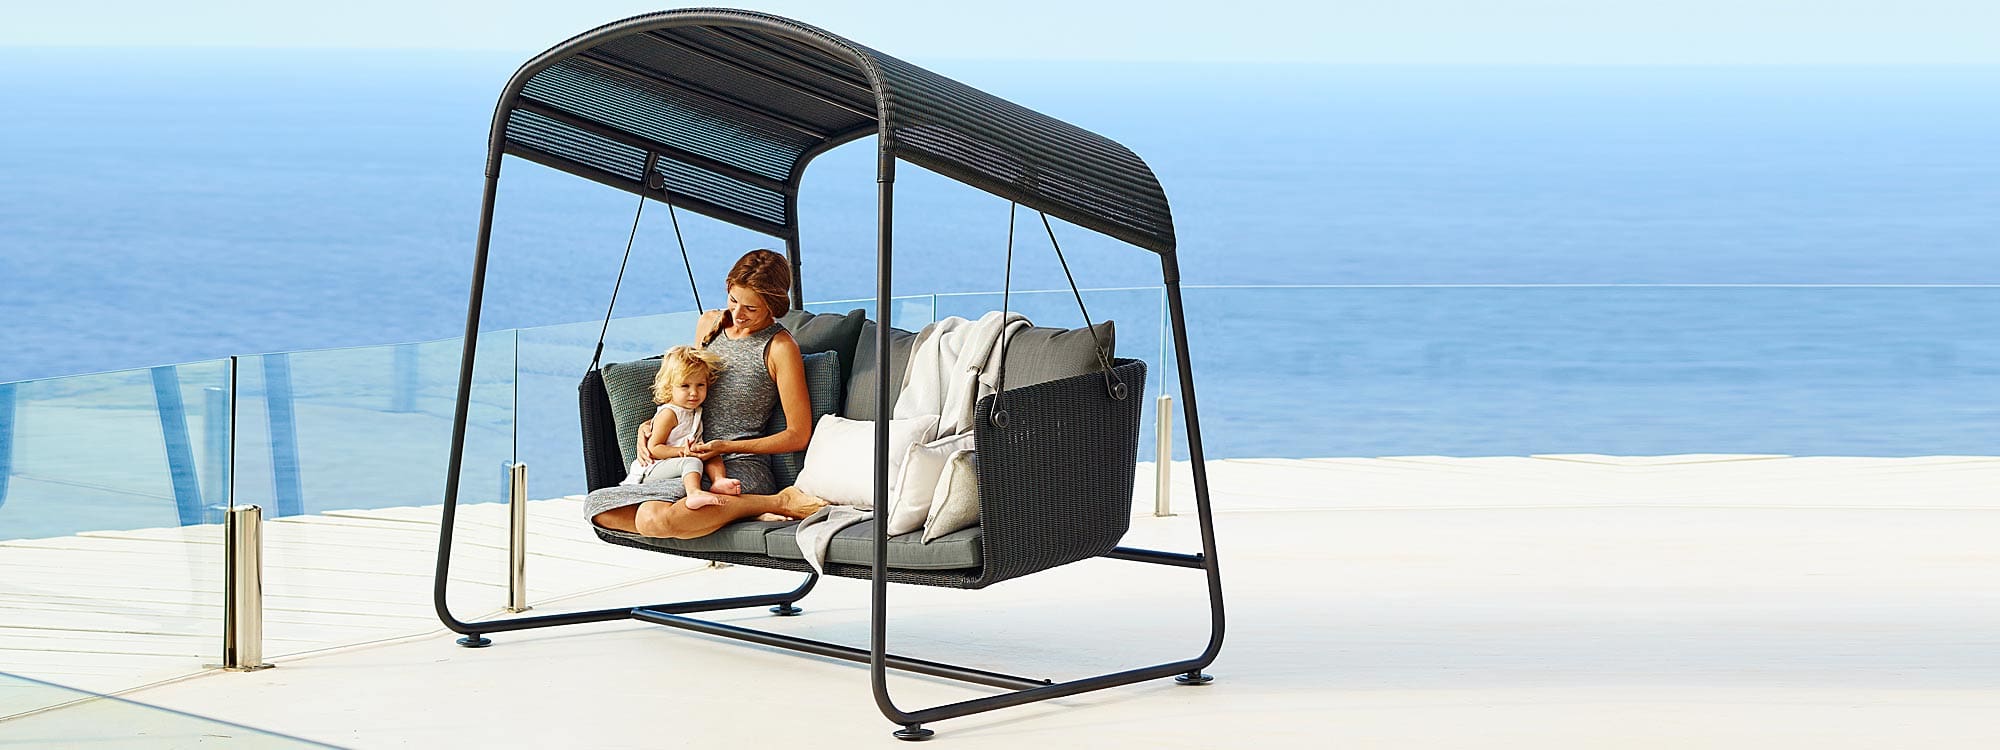 Image of woman and child sat in Cane-line Cave black swing seat with grey cushions on sleek terrace with sea in background disappearing into horizon